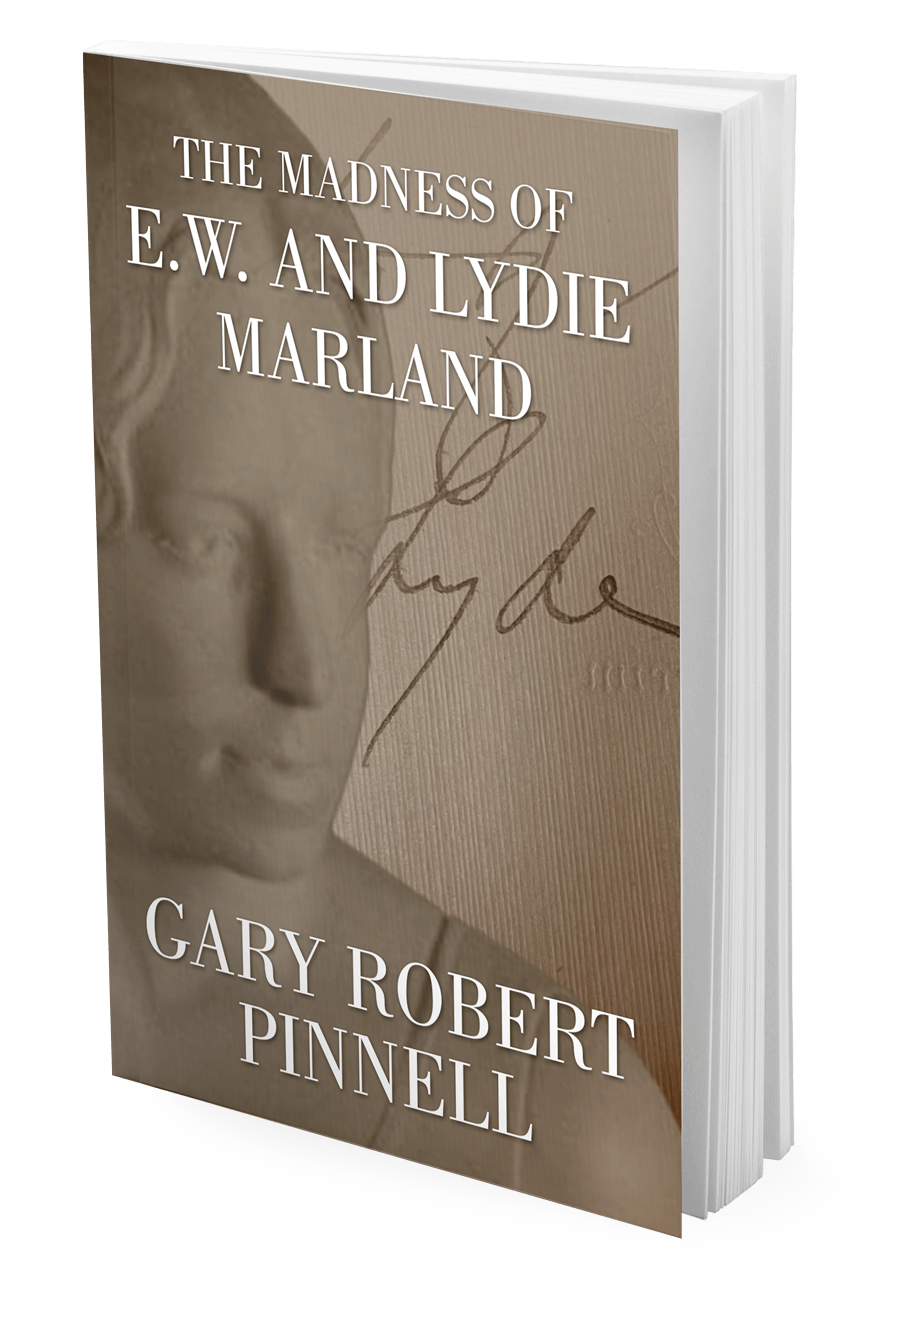 The Madness of E.W. and Lydie Marland